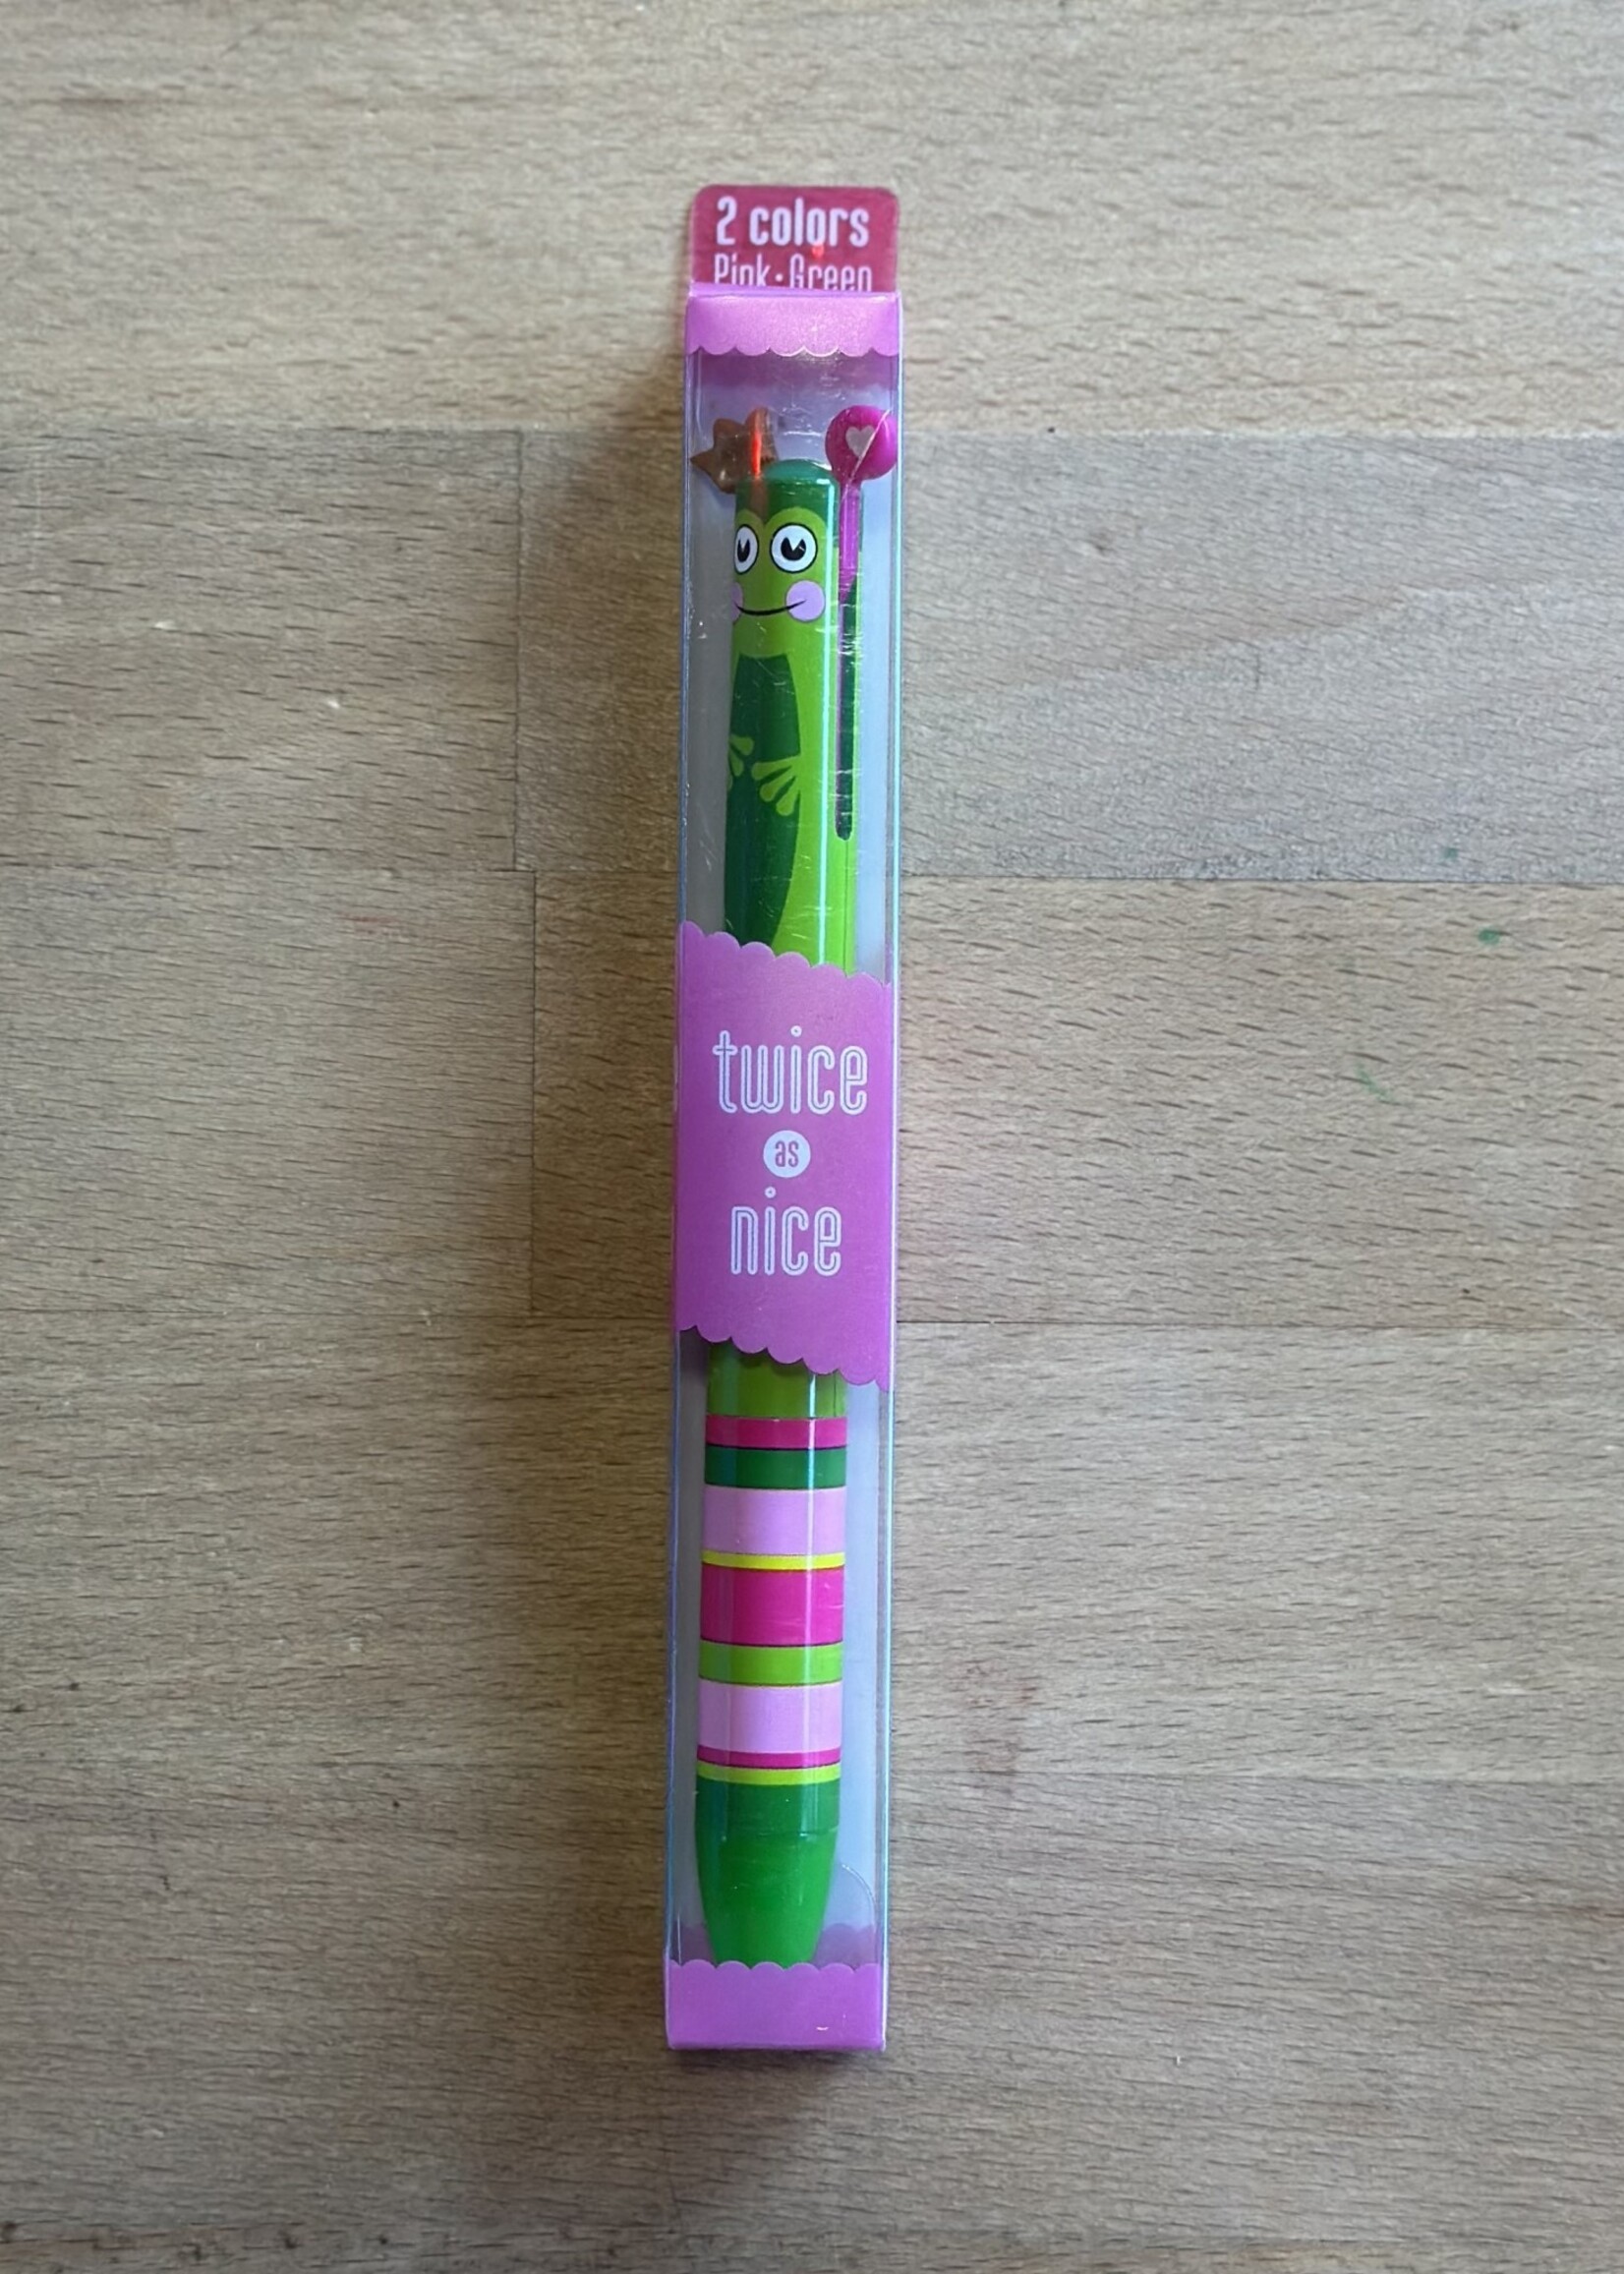 Twice as Nice 2-Color Click Pen - Pink/Green